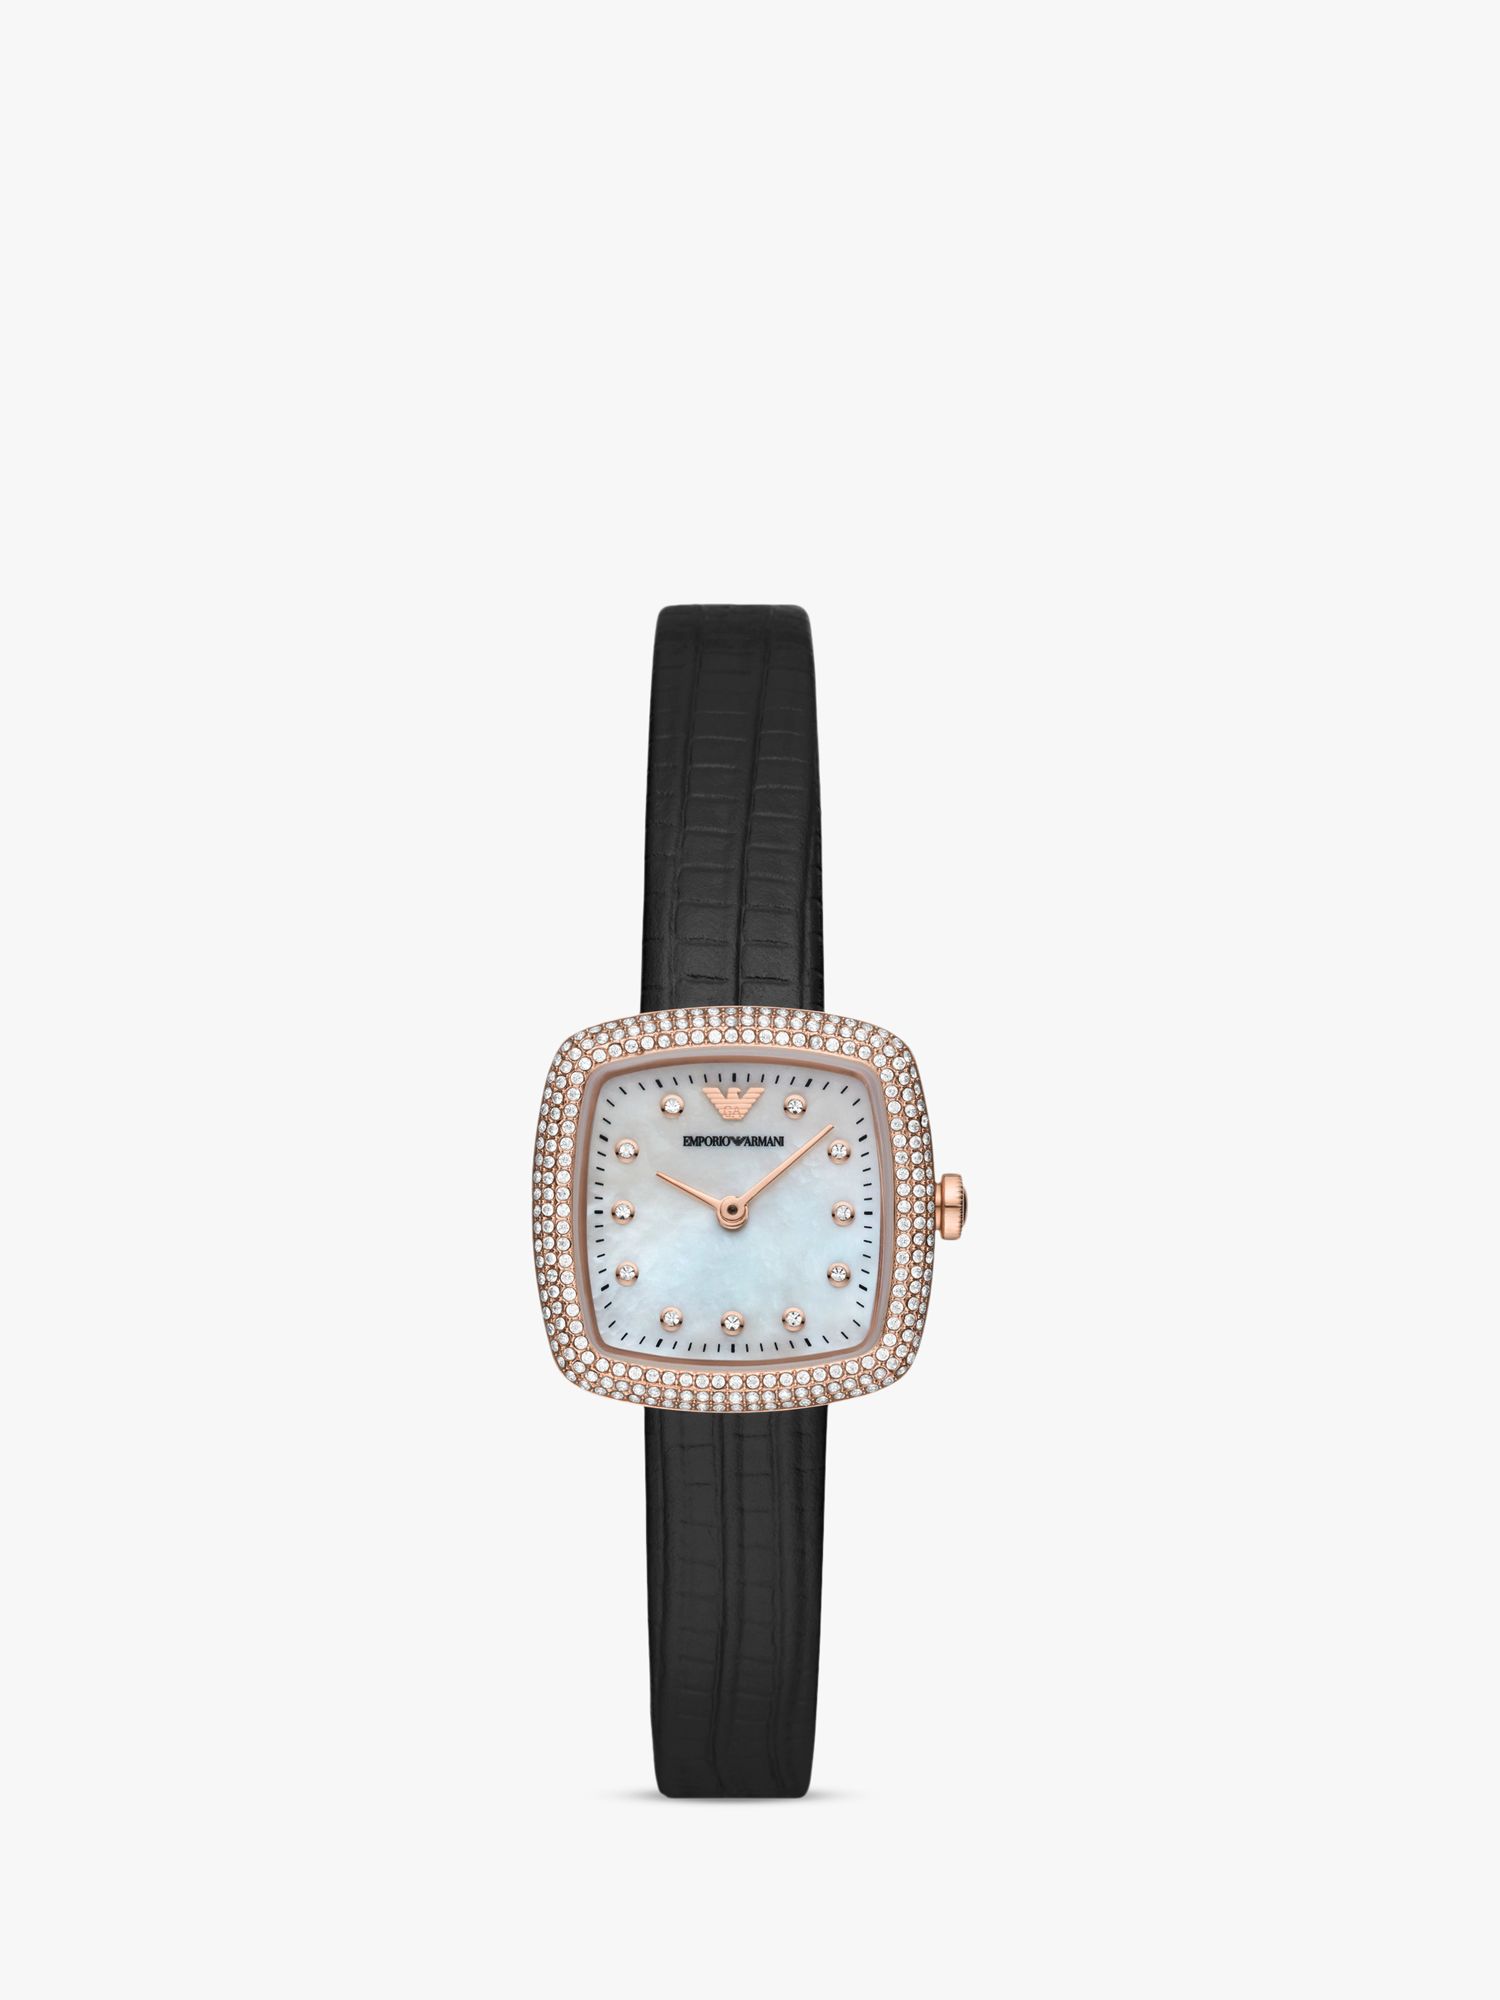 Emporio Armani AR11495 Women's Crystal Leather Strap Watch, Black/Mother of  Pearl at John Lewis & Partners